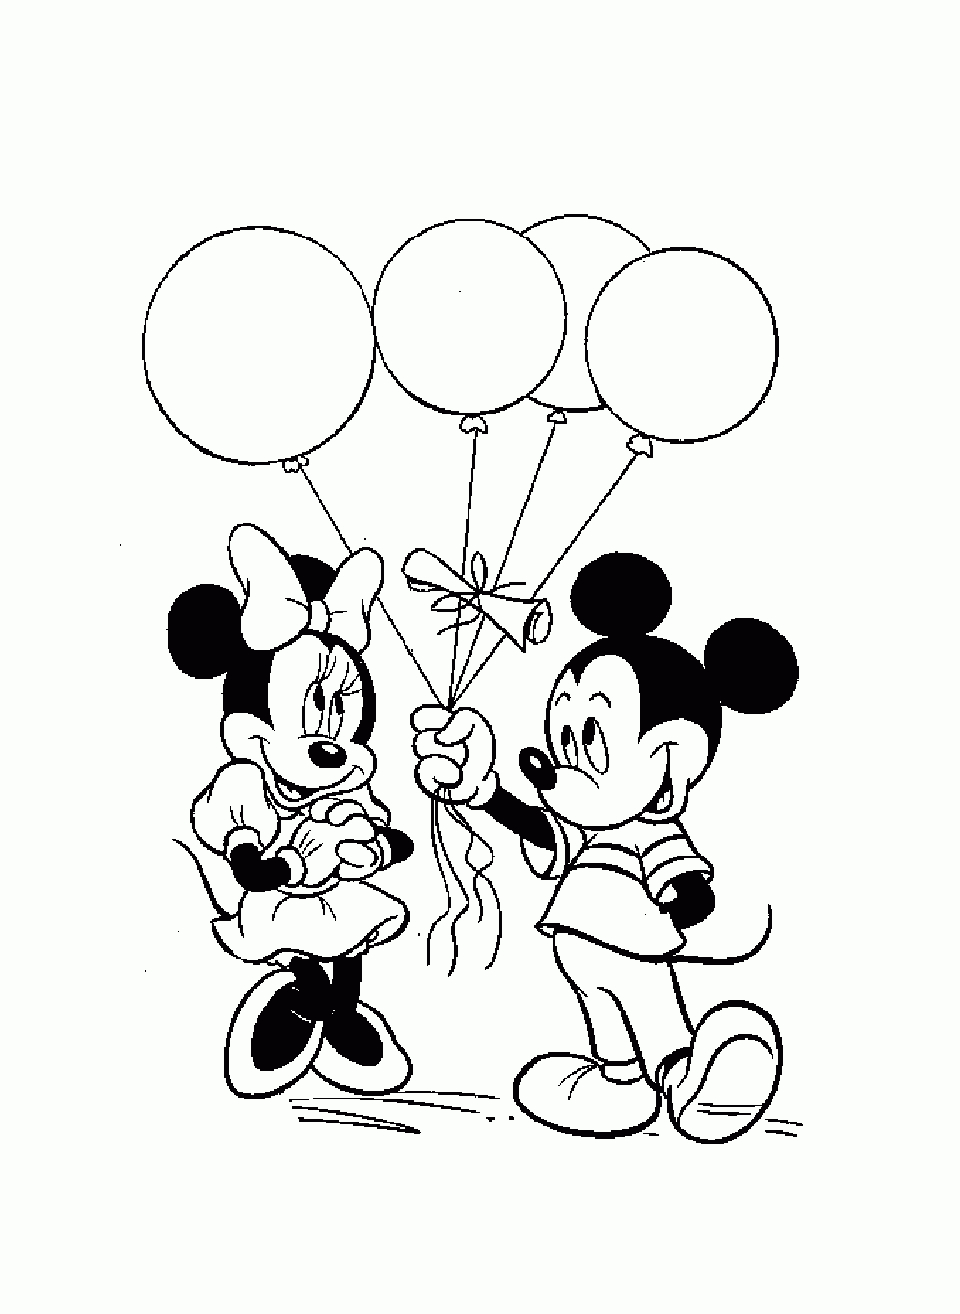 Mickey Minnie Ballons Coloriage Mickey Et Ses Amis Intérieur Dessin